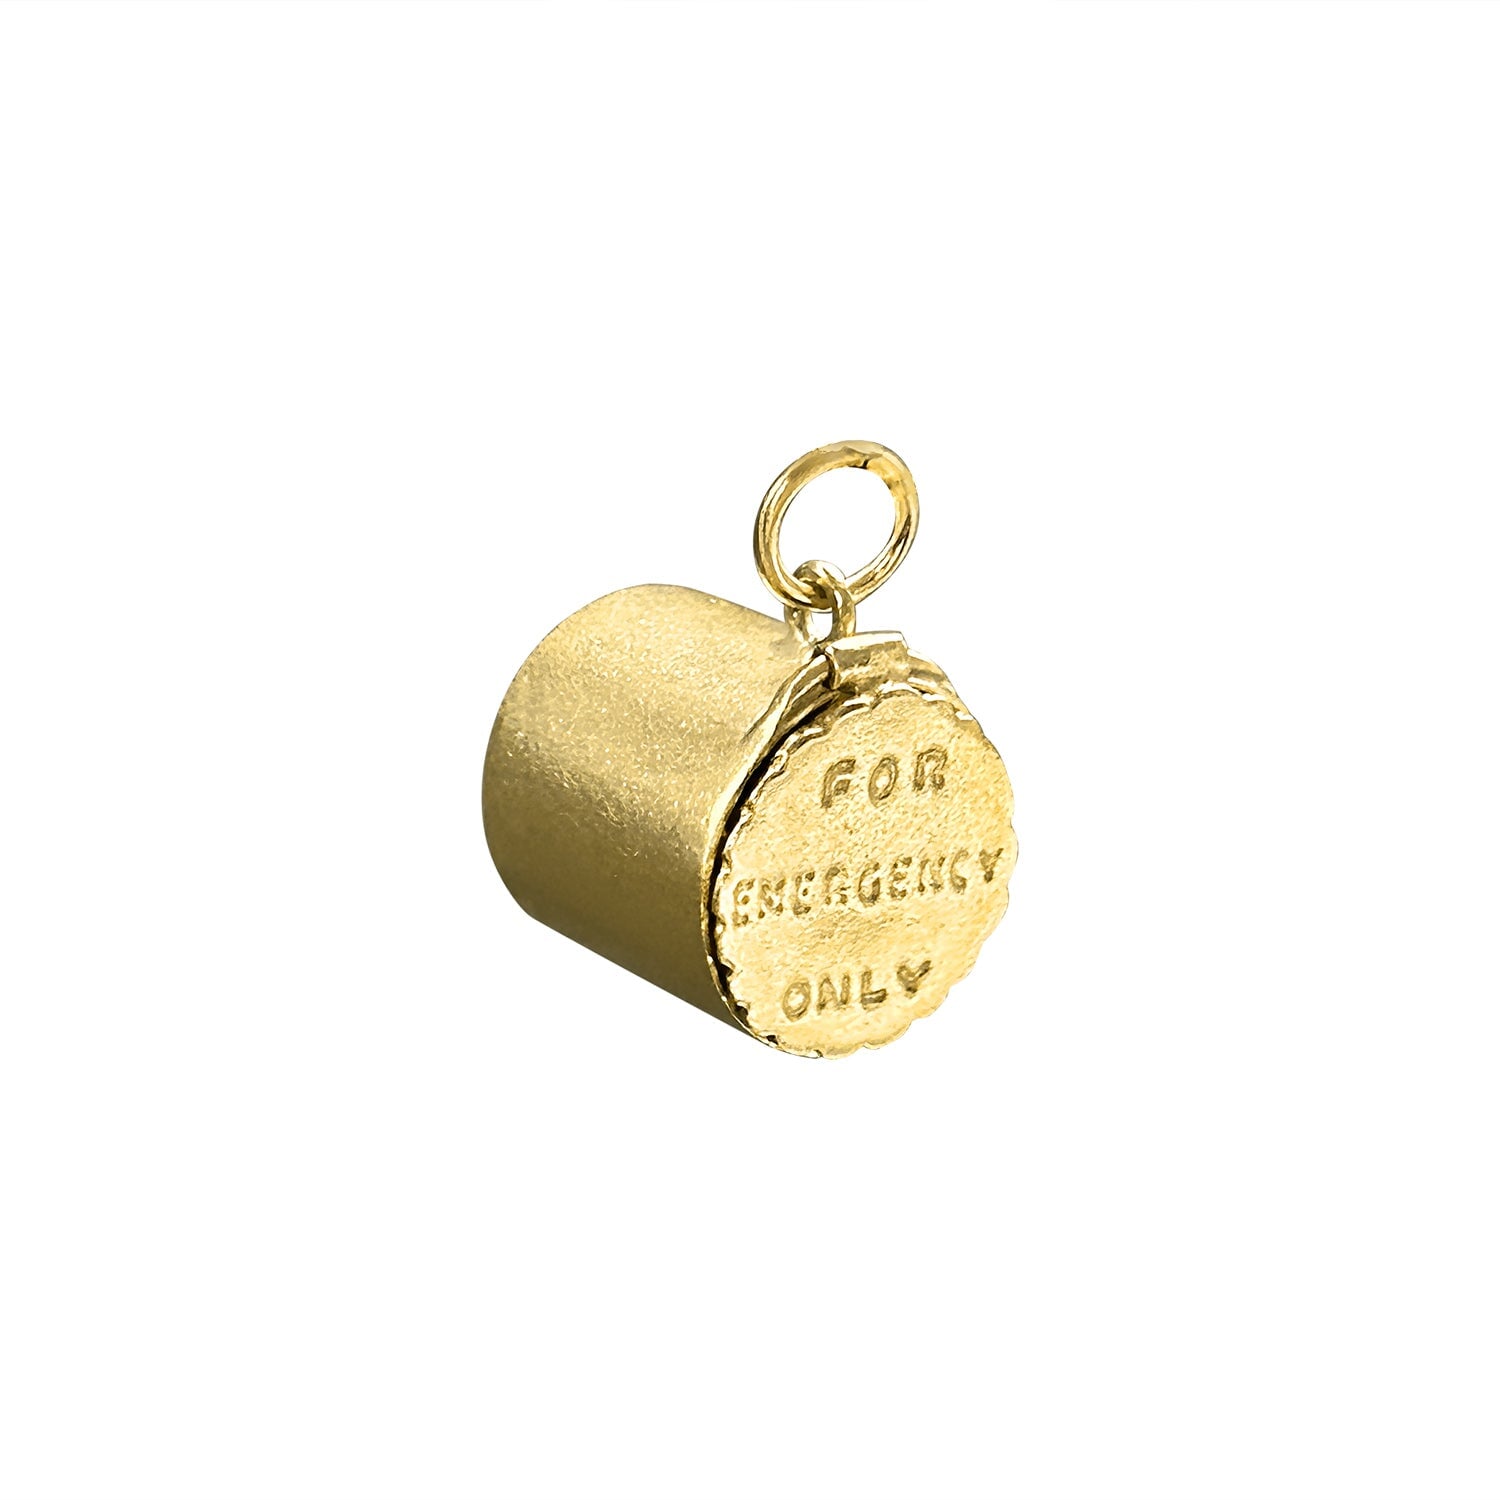 Vintage "For Emergency Only" Capsule Charm